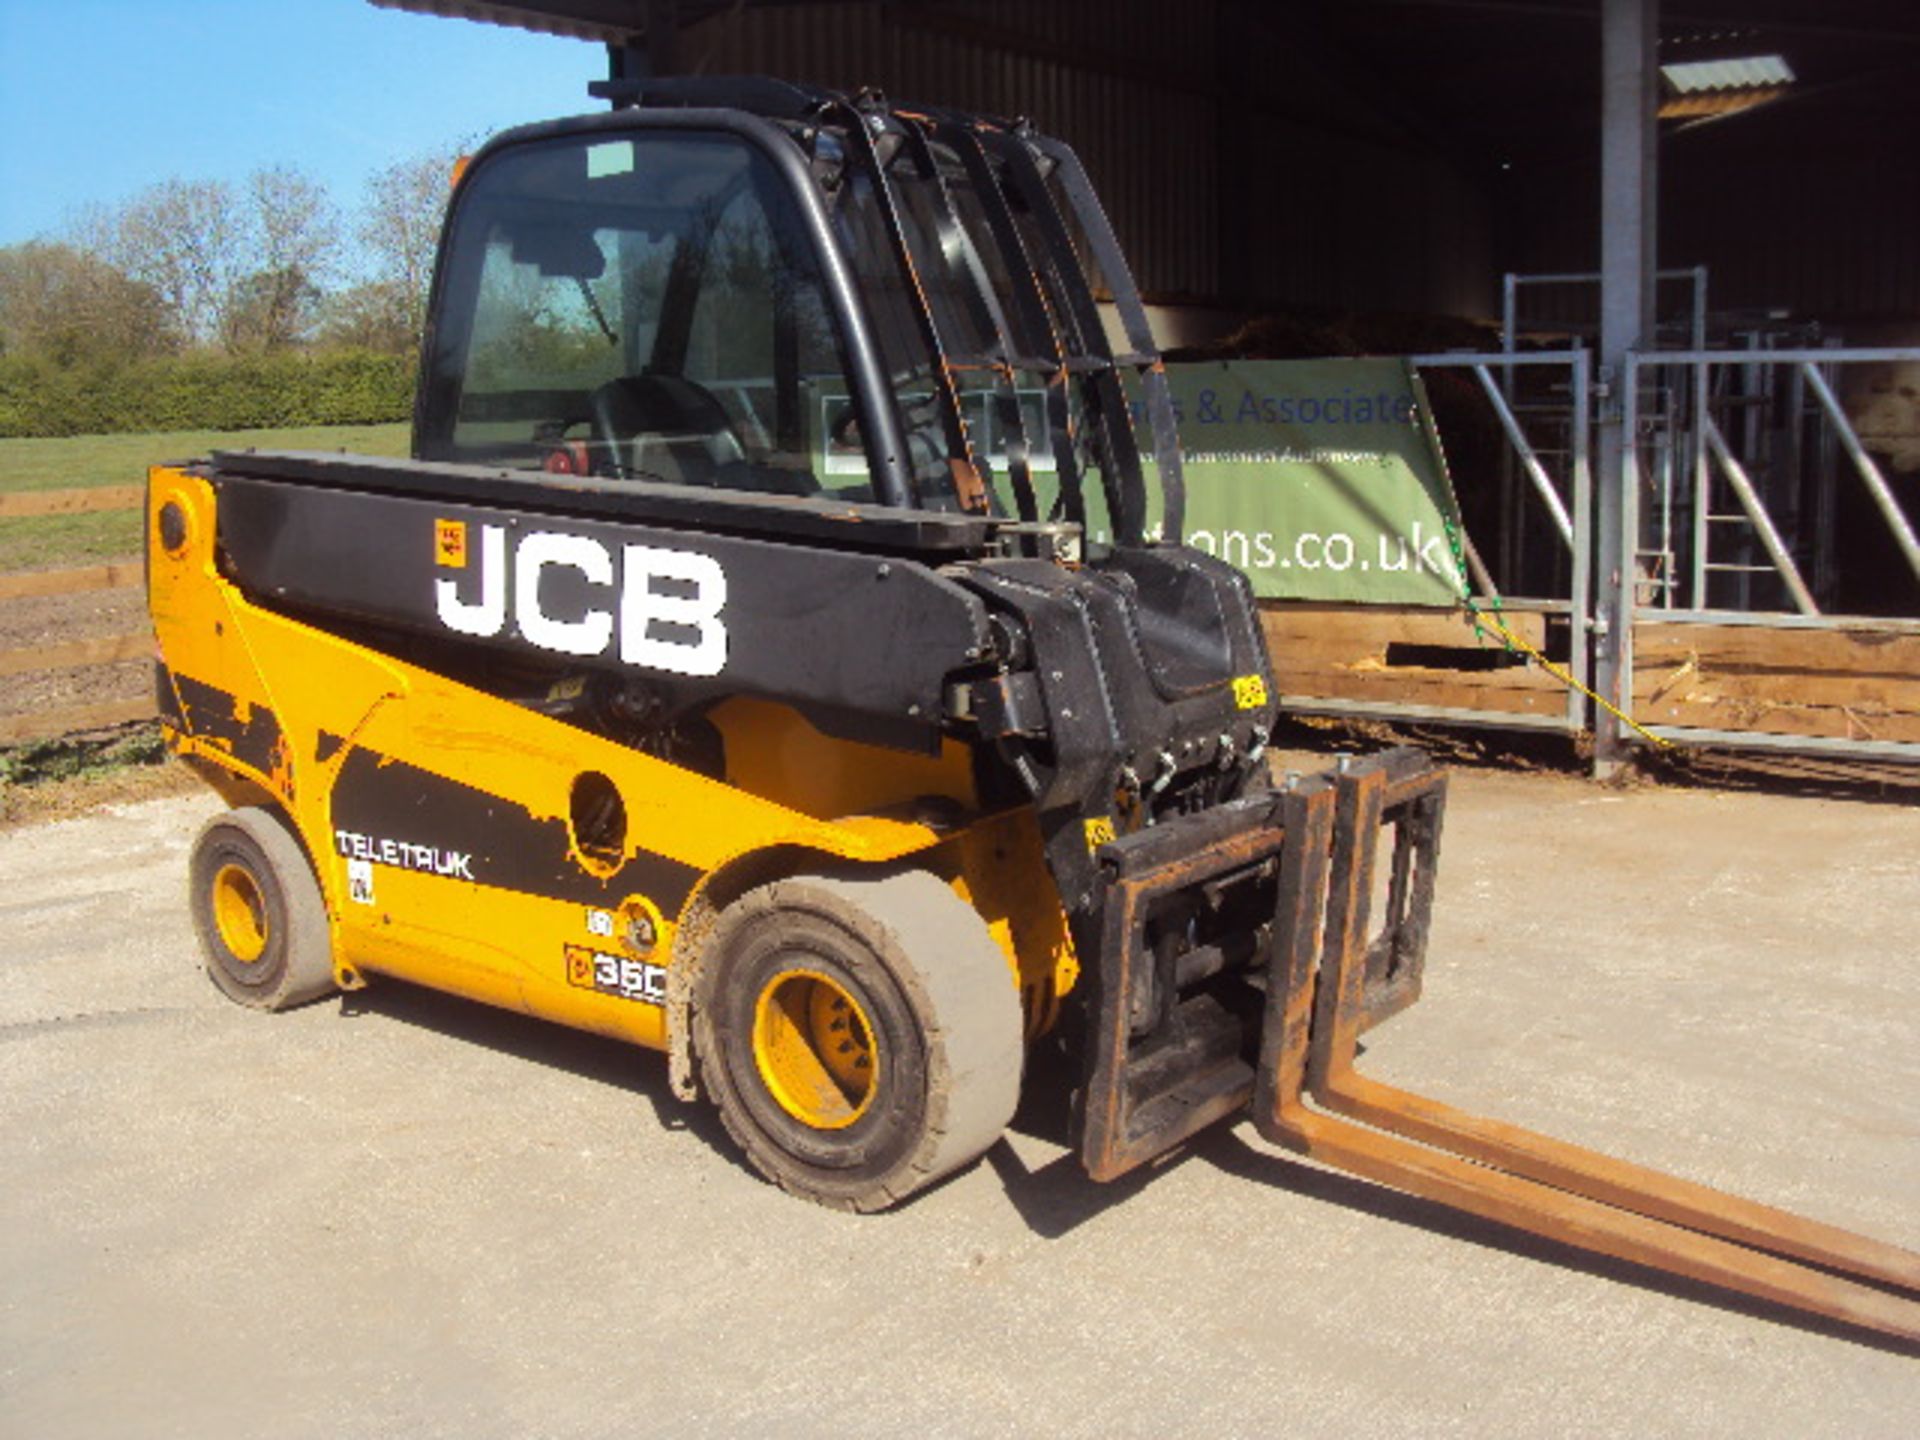 2011 JCB 35D Wastemaster 3.5t diesel driven Teletruck (S/n J01540558) (3886 rec hrs) with side-shift